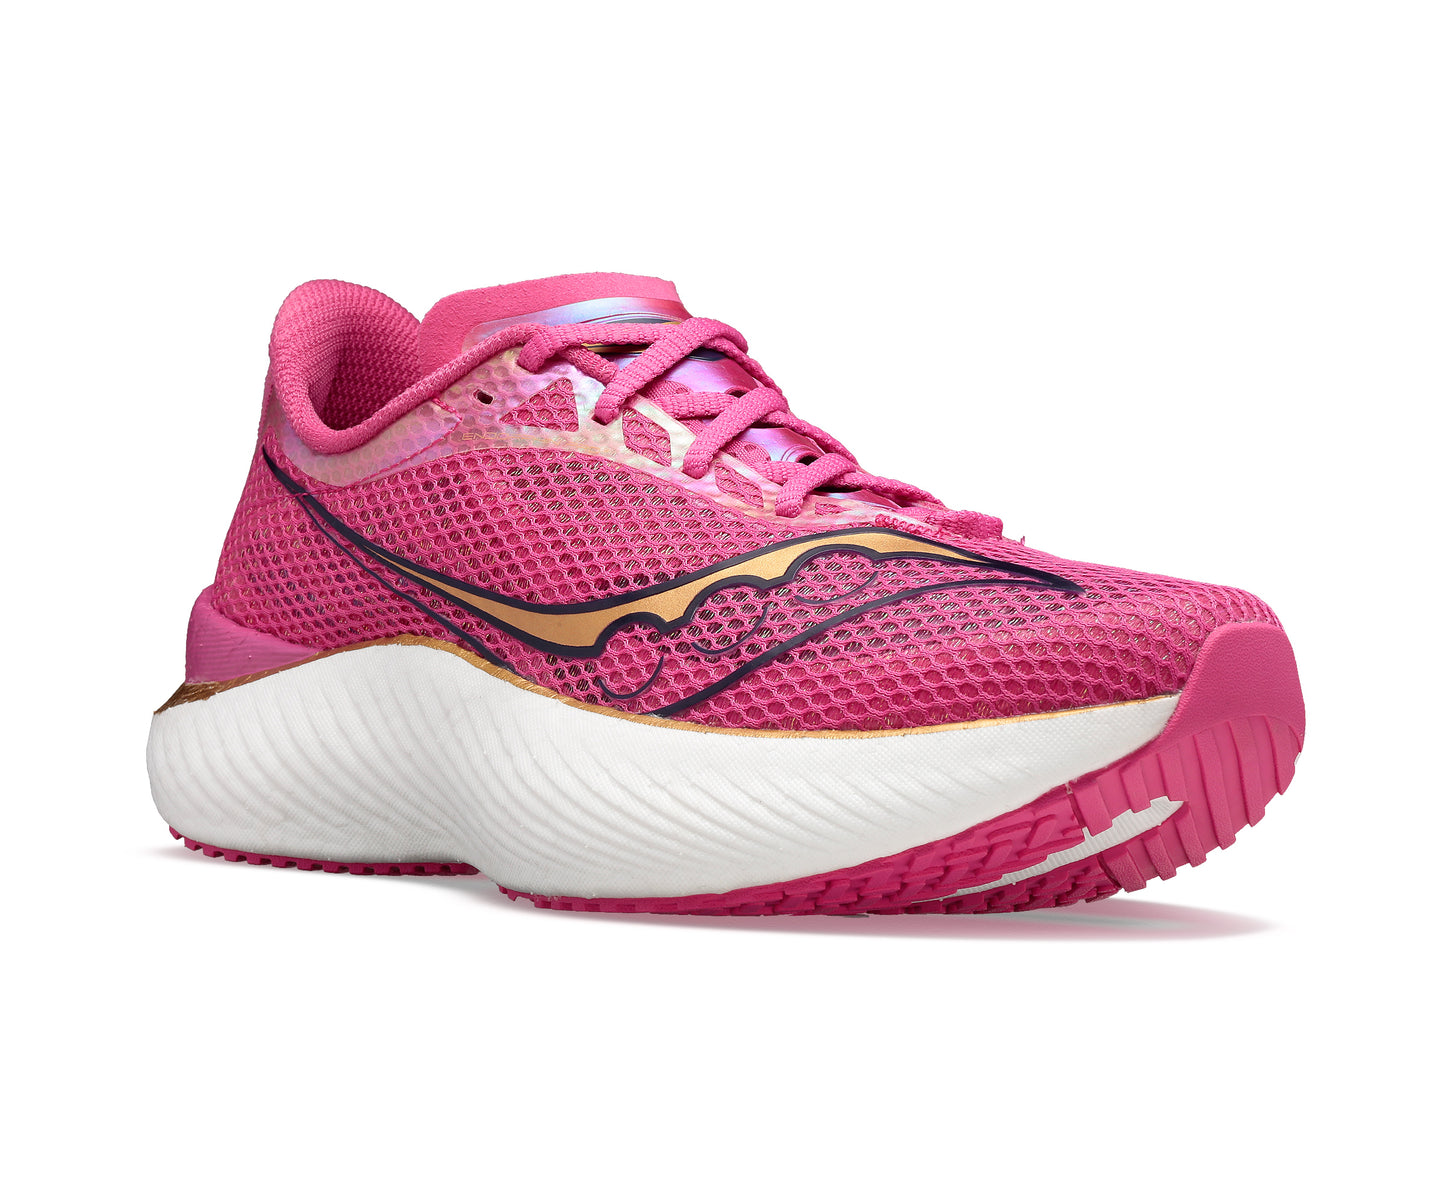 Saucony Endorphin Pro 3 carbon plate running shoe magenta, white, gold